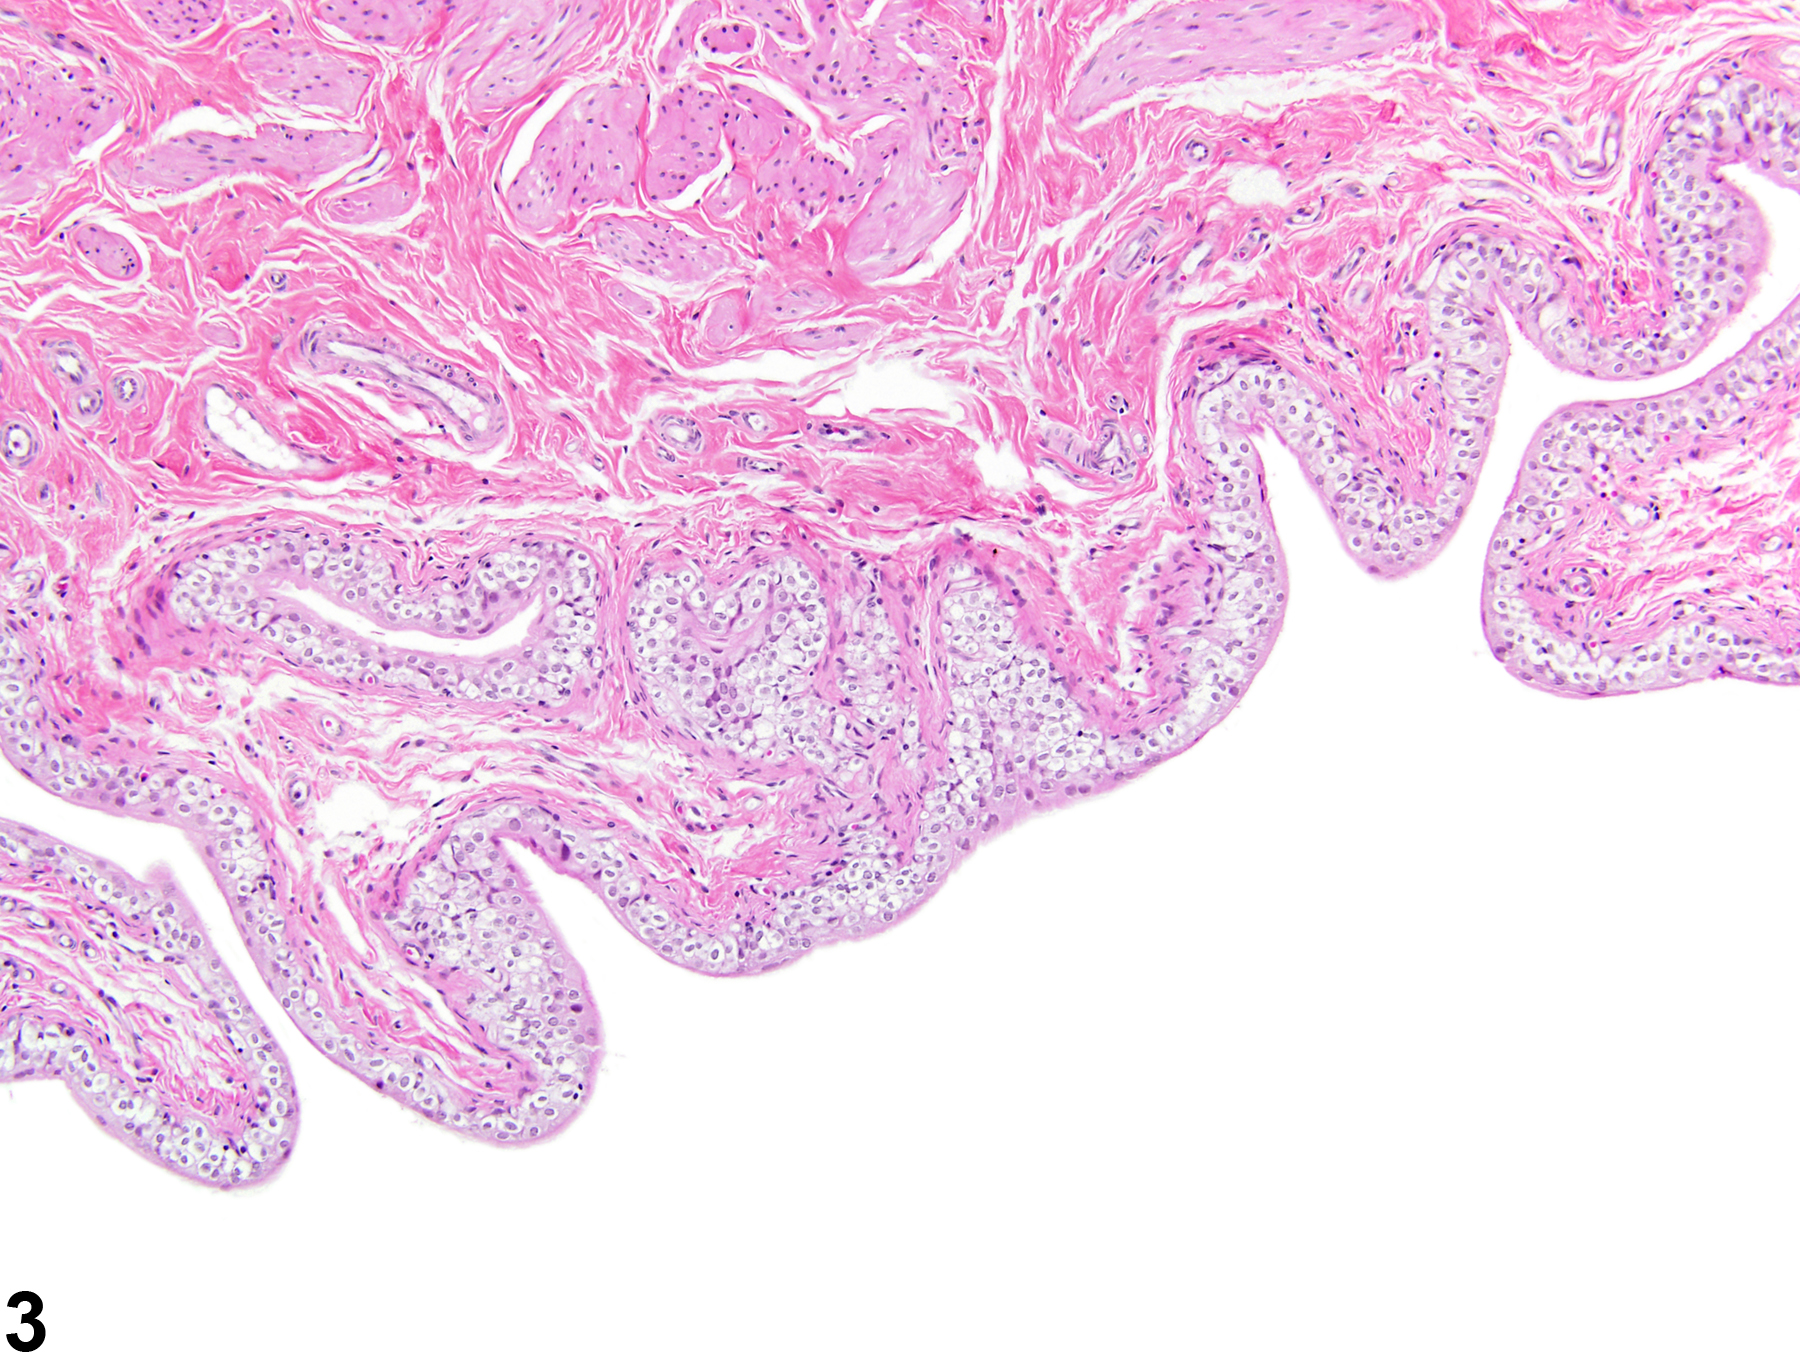 Image of vacuolization, cytoplasmic in the urinary bladder from a male F344/N rat in a chronic study